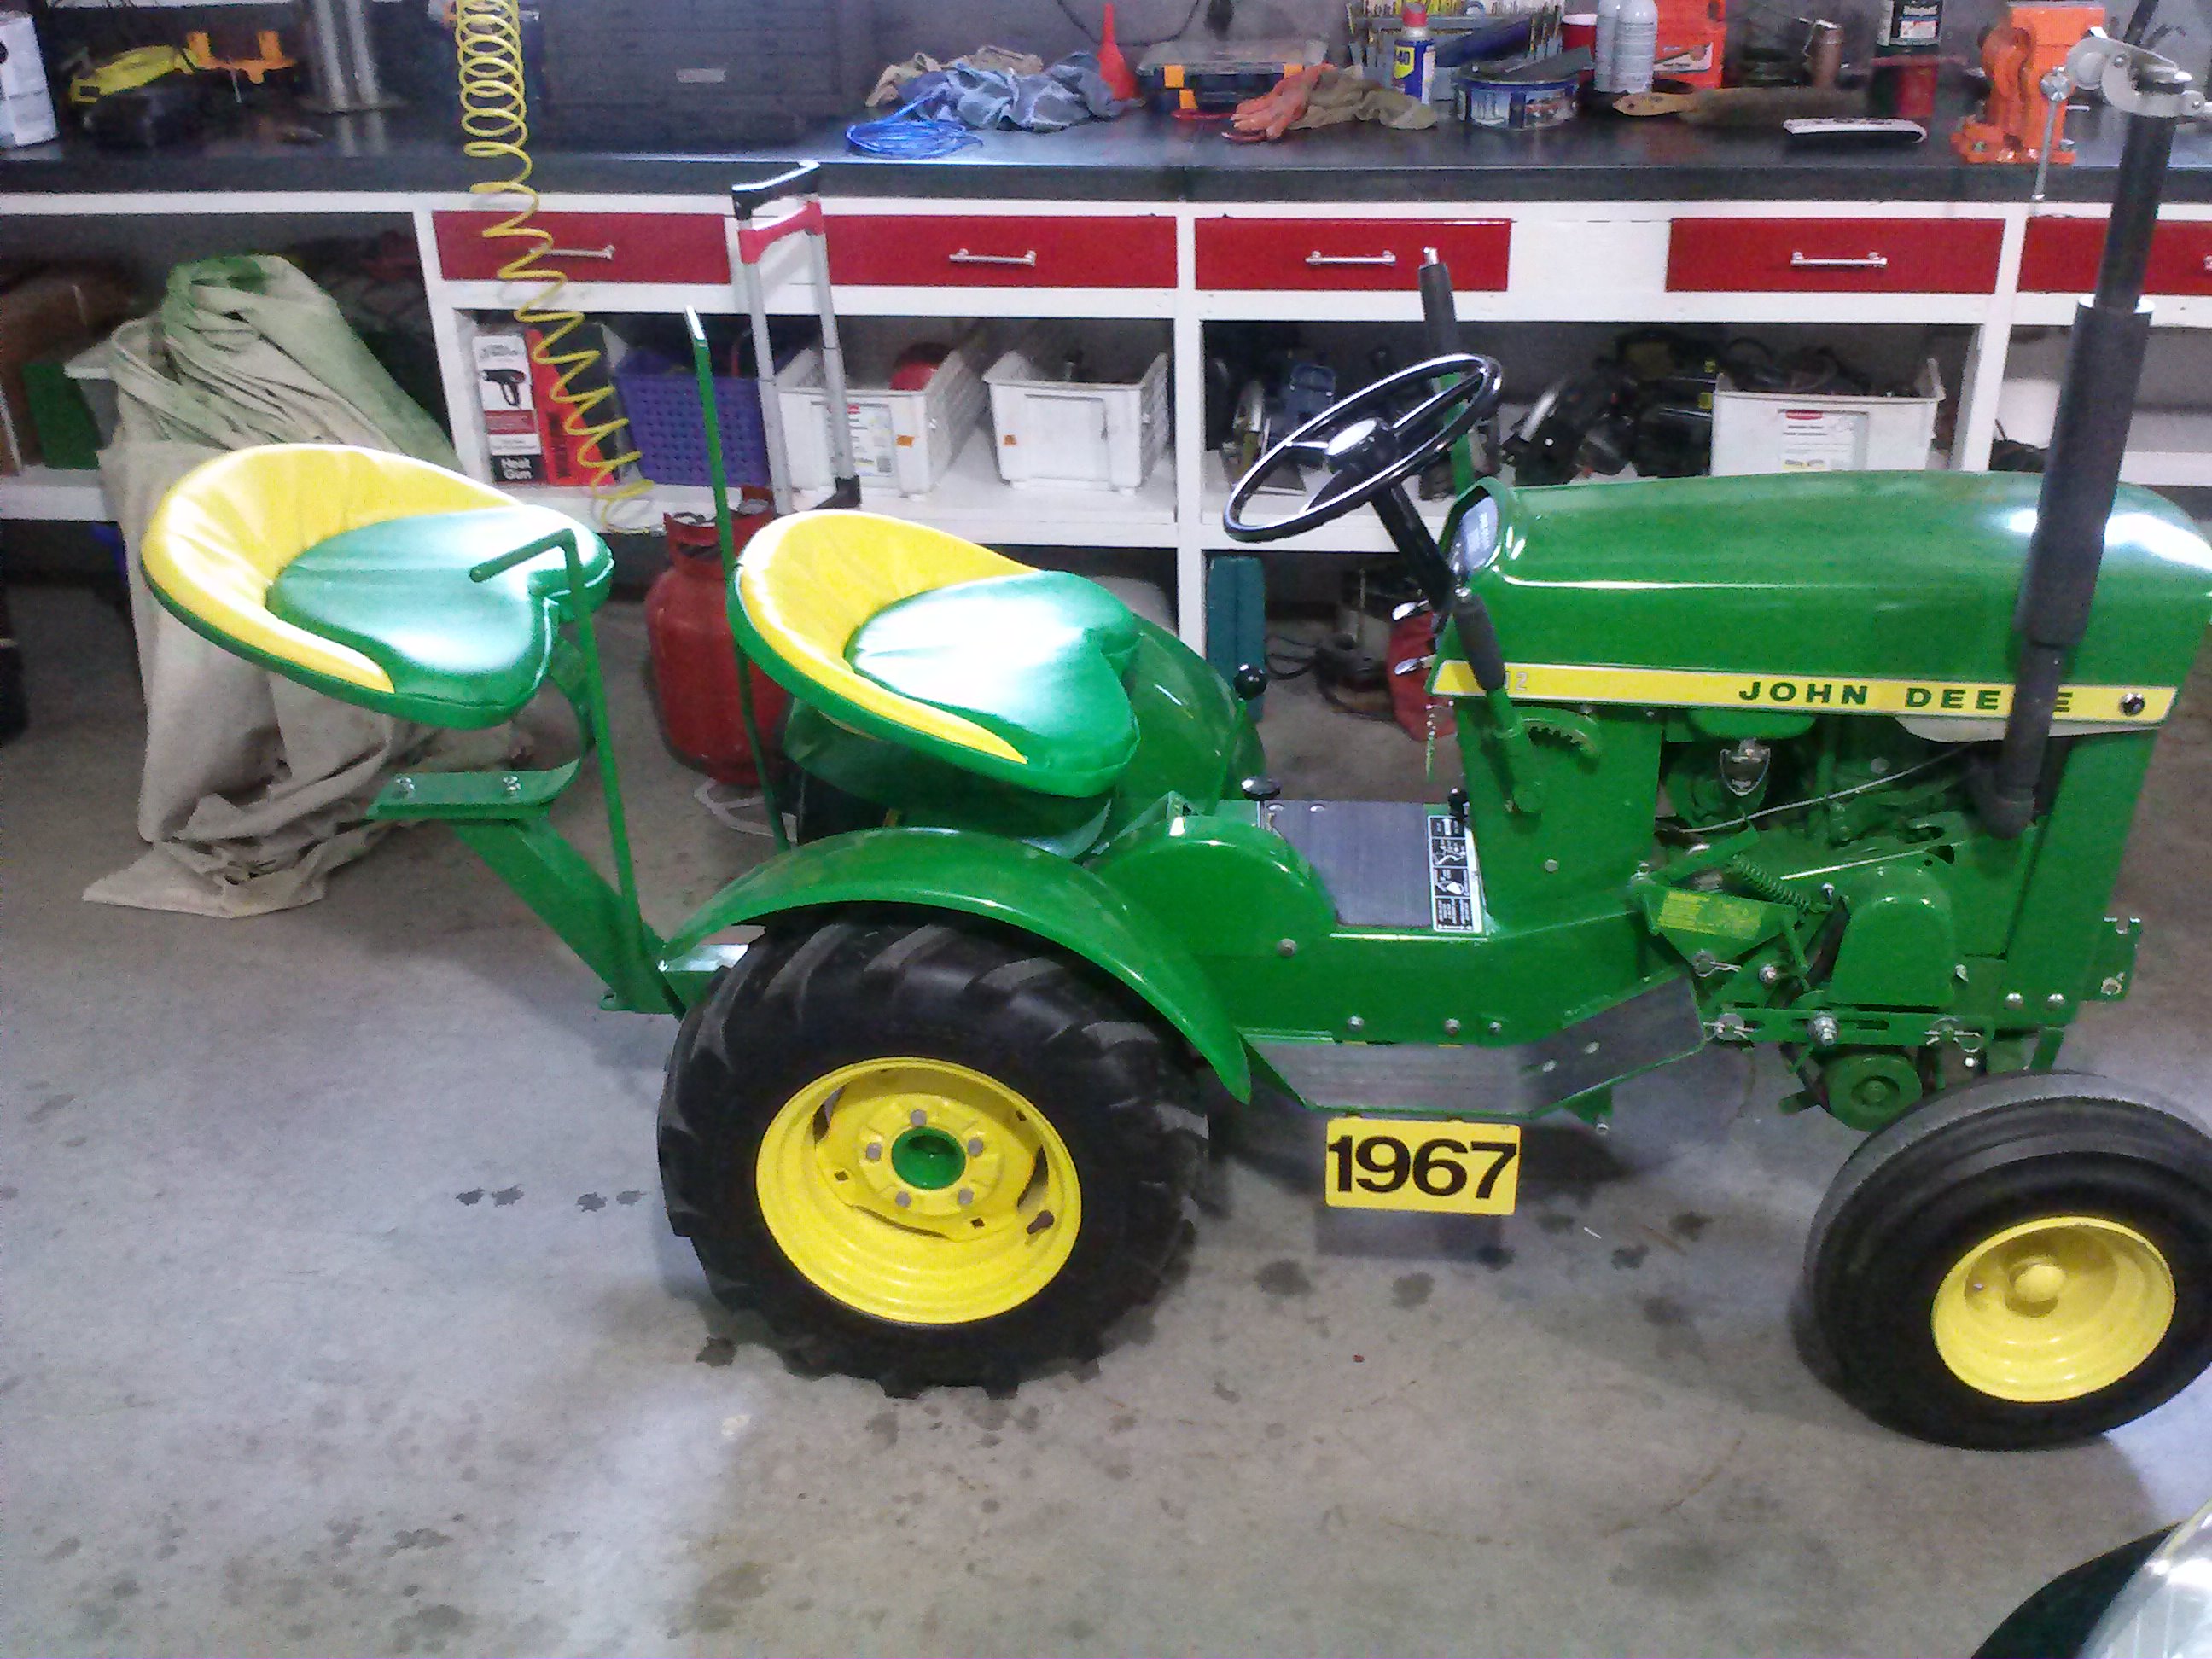 My 1967 John Deere Model 112 garden tractor with HH100 Tecumseh Engine and added buddy seat ...